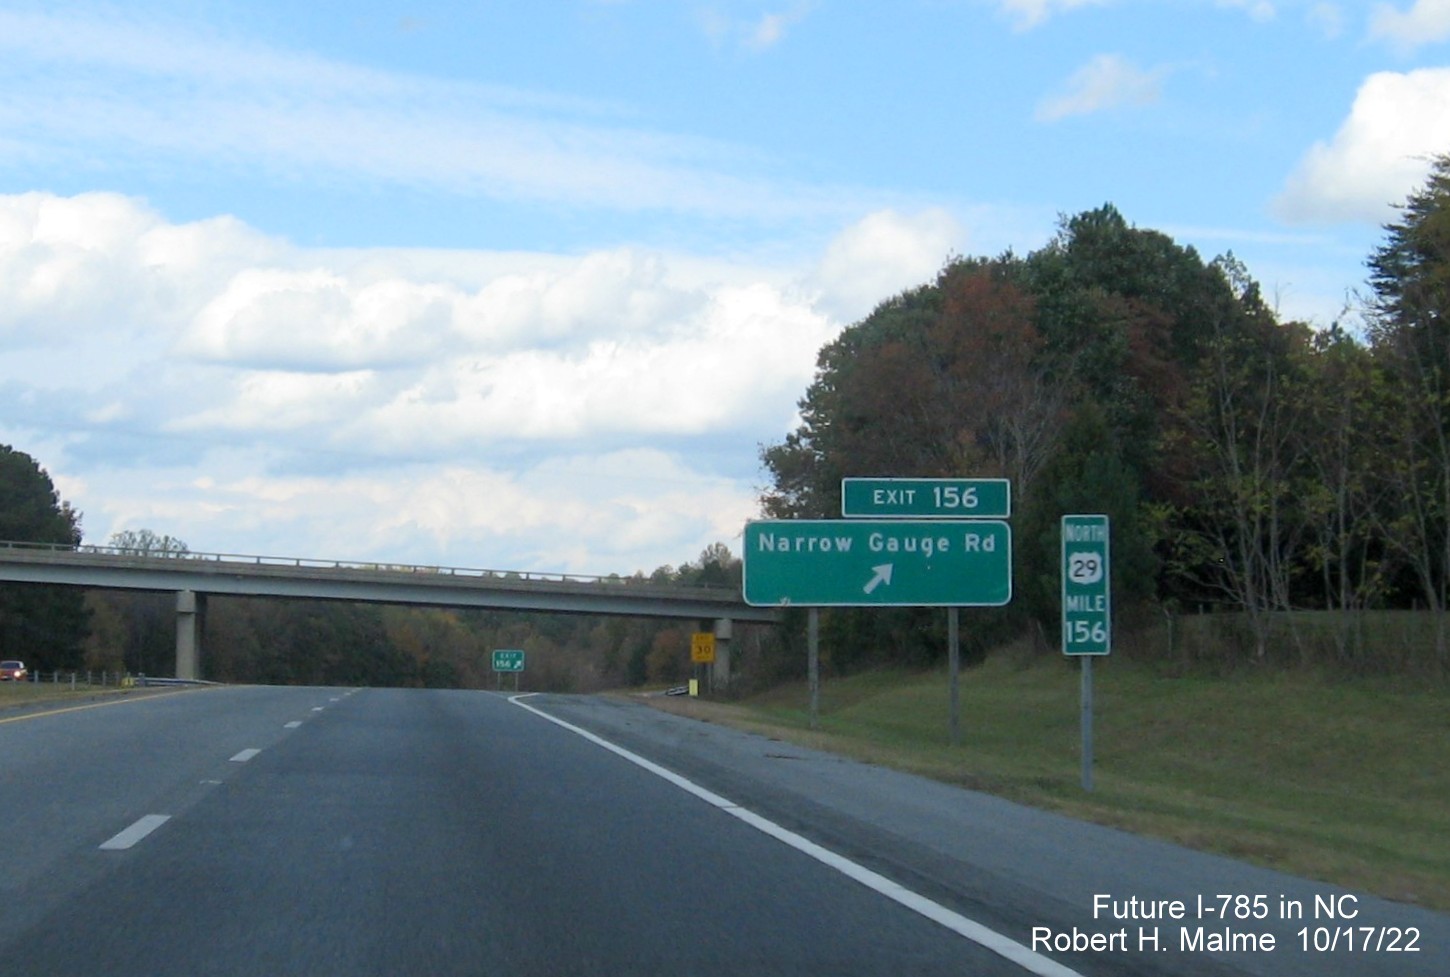 Image of ground mounted ramp sign for the Narrow Gauge Road exit on US 29 (Future I-785) North in Ruffin, October 2022